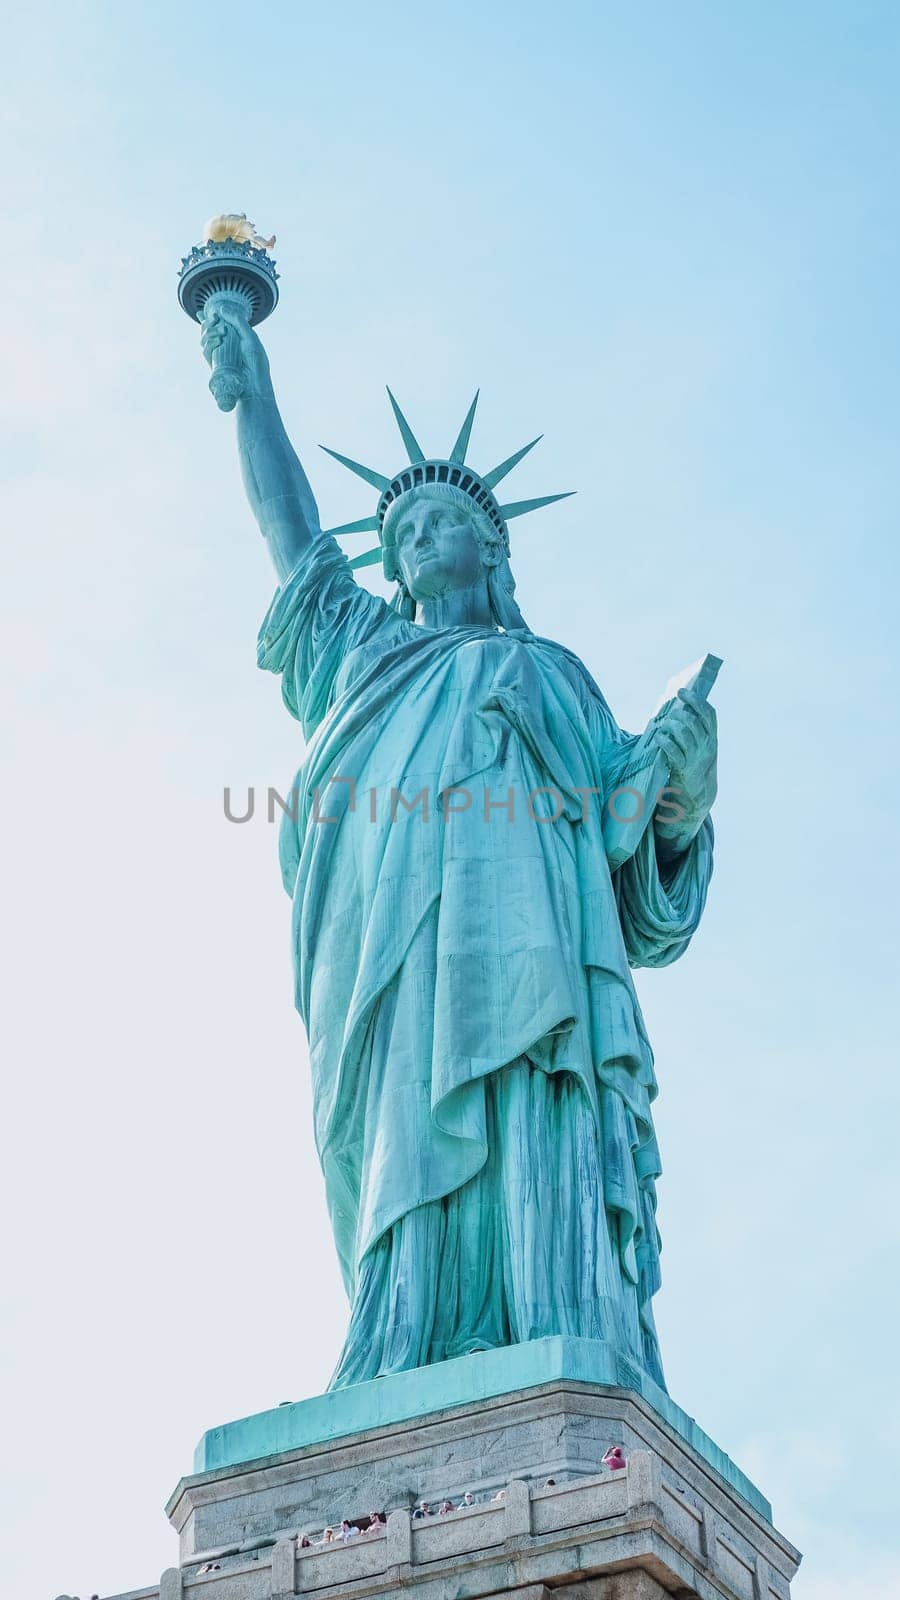 The Statue of Liberty, New York City on sunny blue sky. American symbol. Memorial day, Patriot Day. Space for text. New York NY USA 2023-07-30 by JuliaDorian